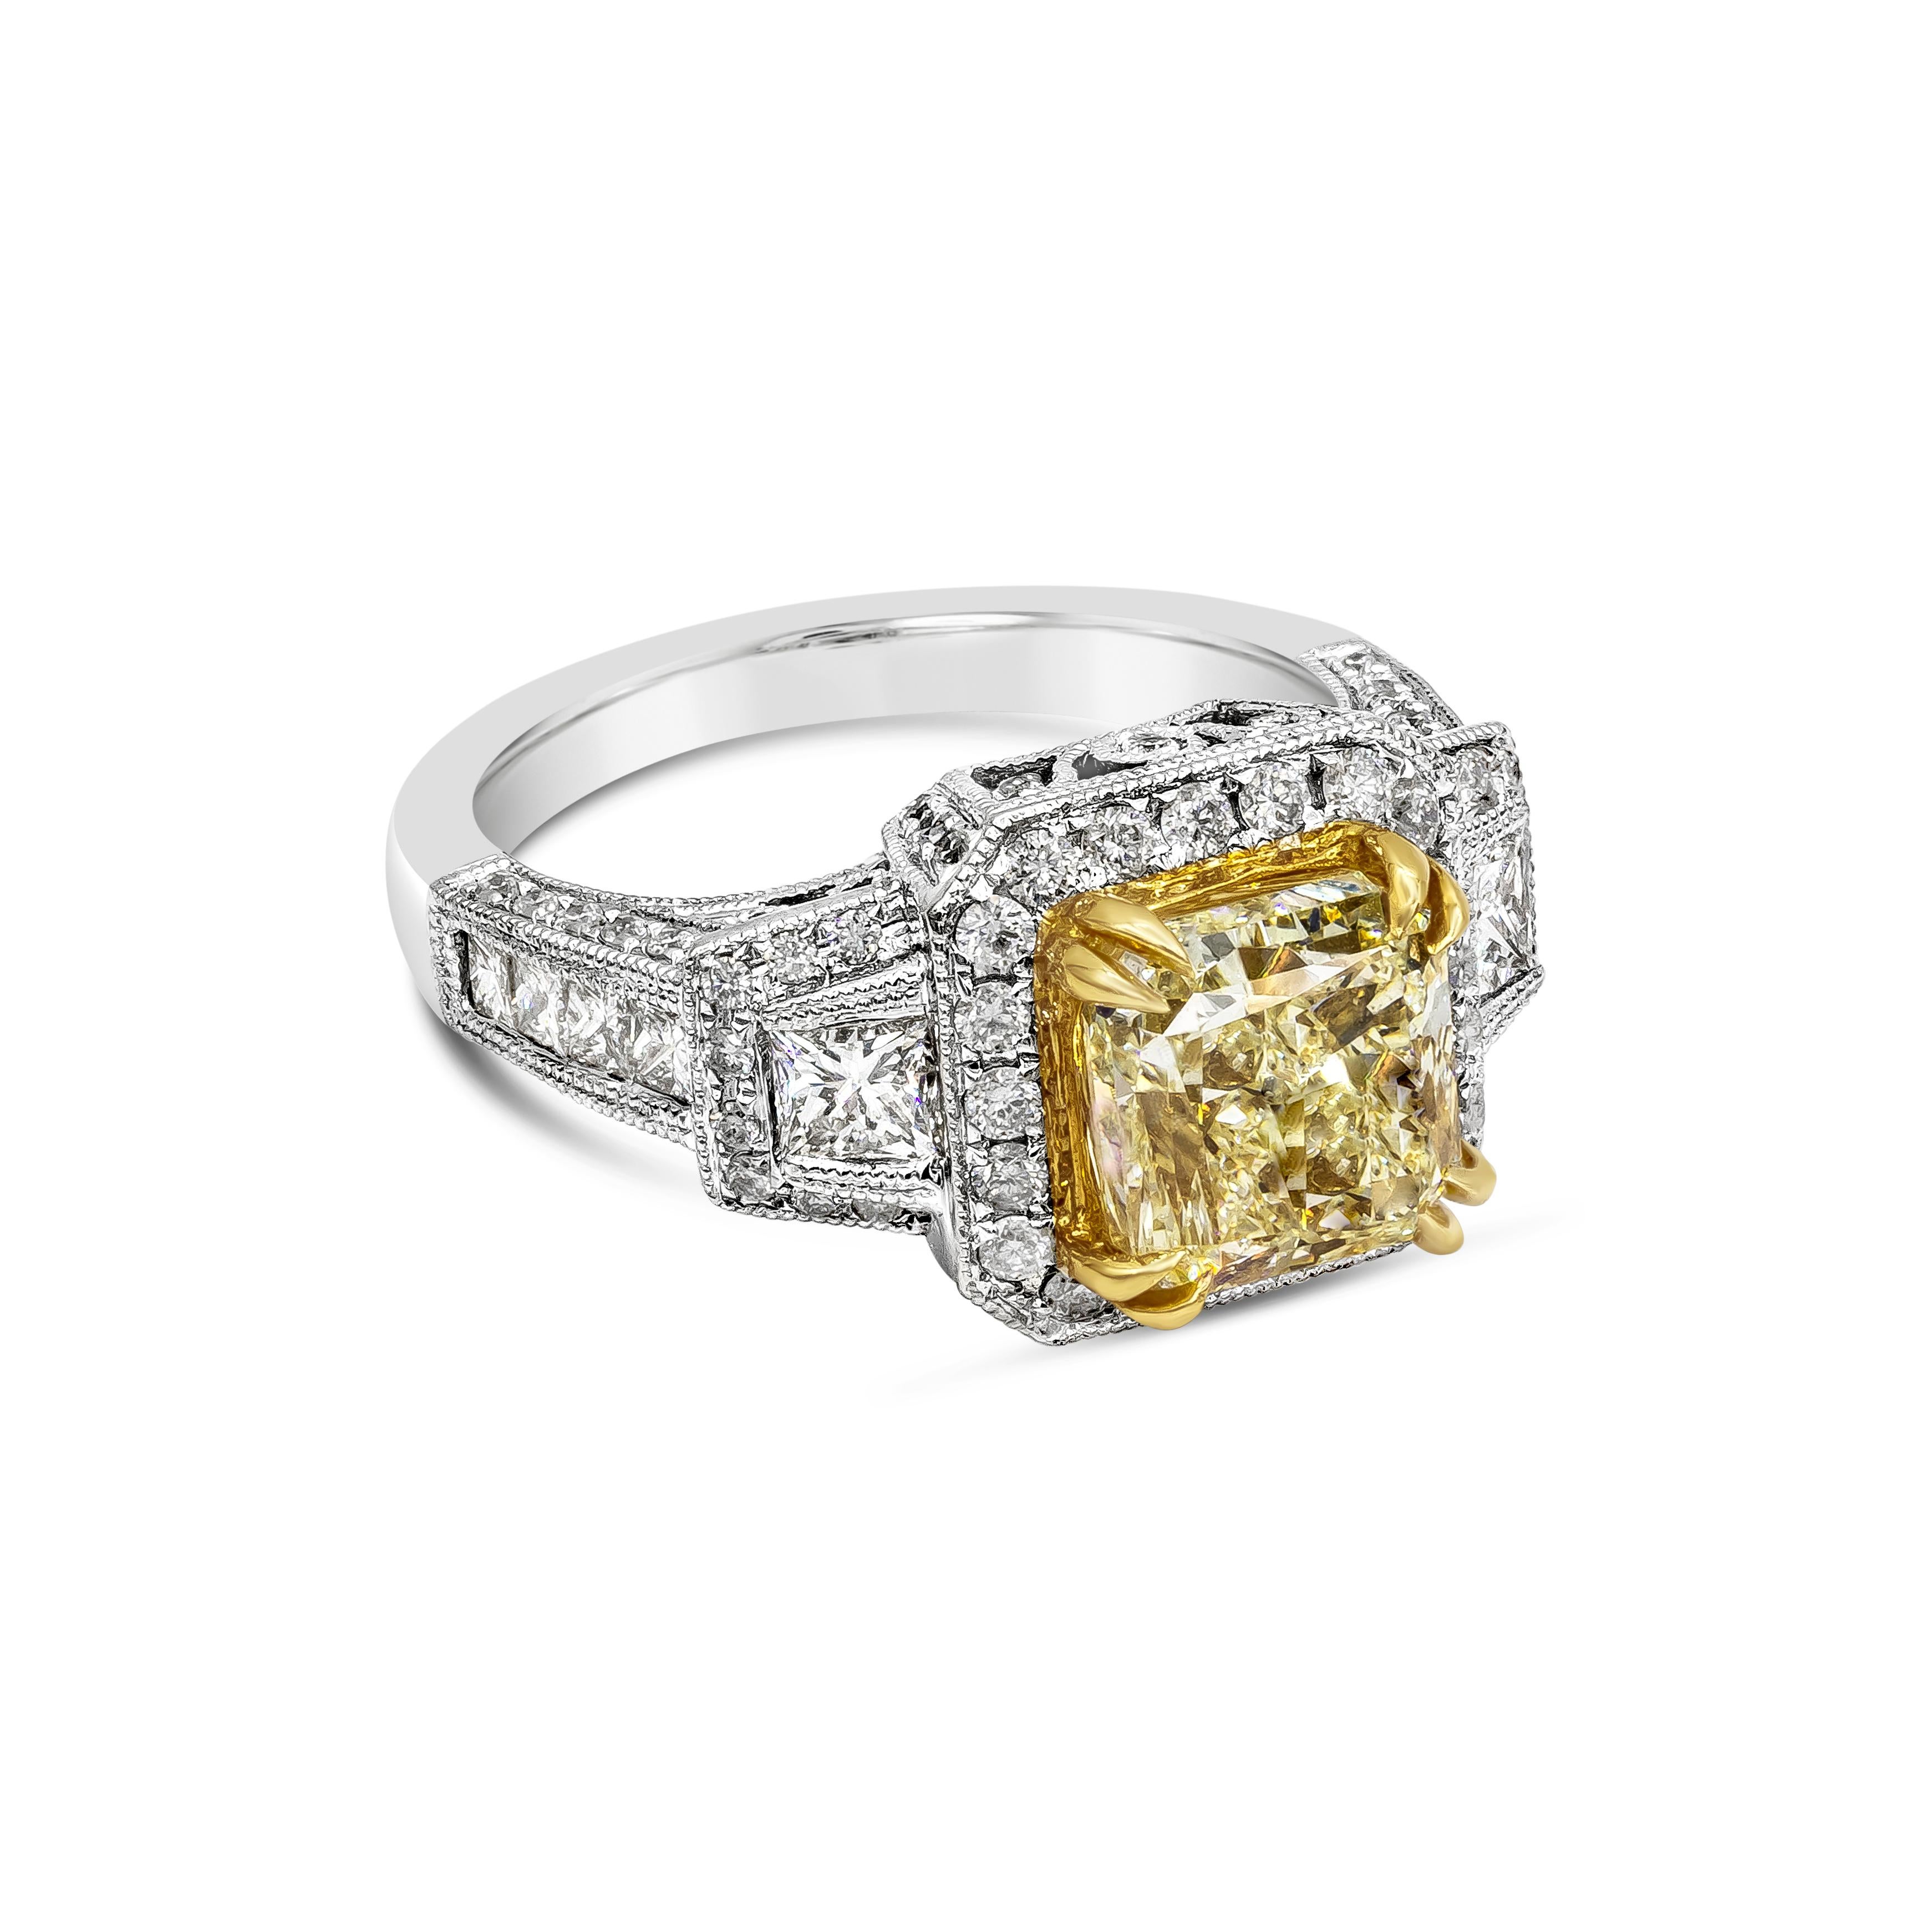 An antique style engagement ring showcasing a GIA Certified 3.40 carat radiant cut yellow diamond, Y-Z Color and Si1 in clarity, set in eight prong 18K yellow gold. Surrounded by round diamonds in halo setting and accented by two brilliant trapezoid